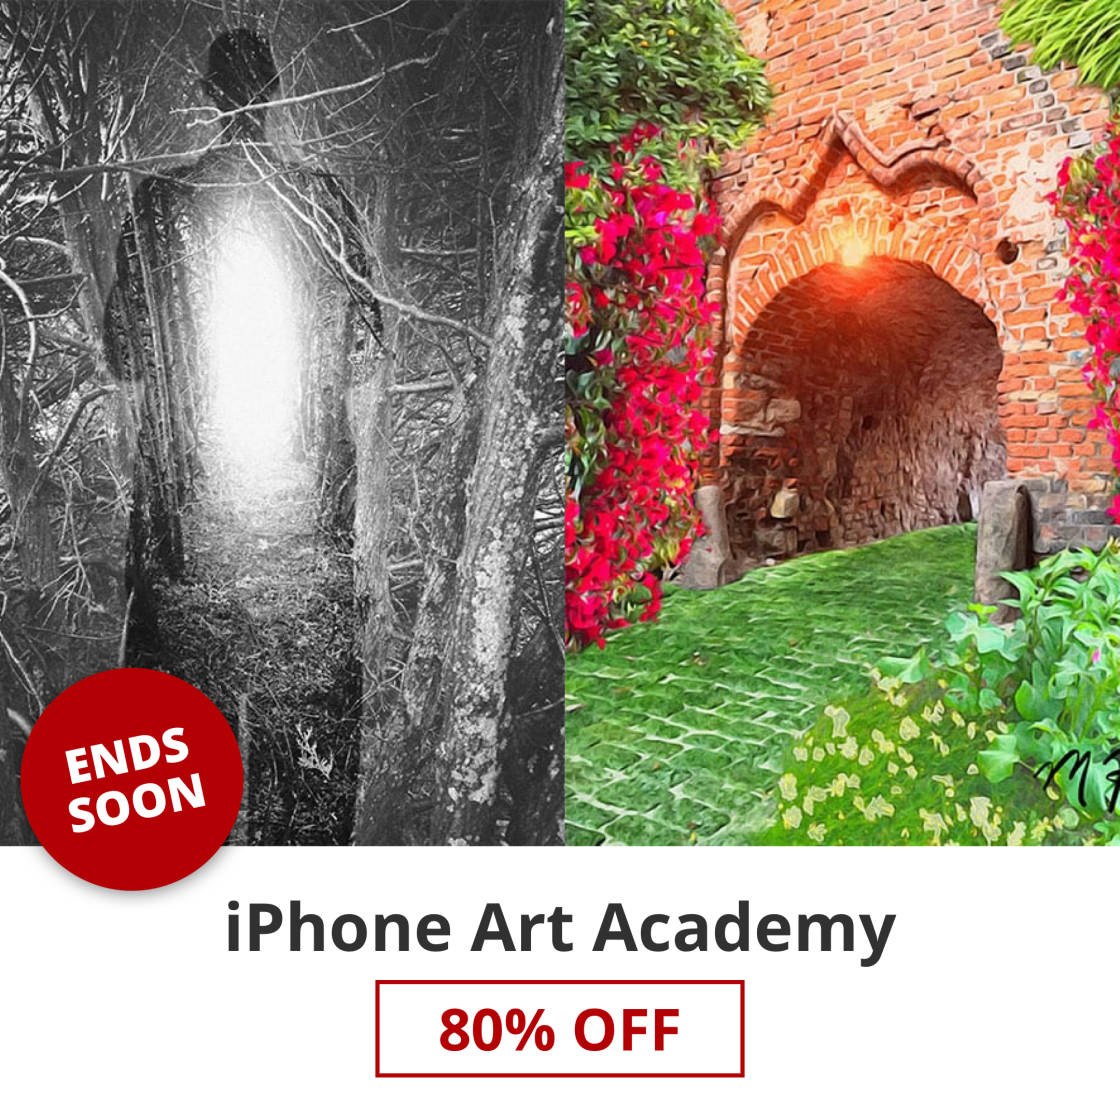 Huge 80% Discount For Our iPhone Art Academy Online Course